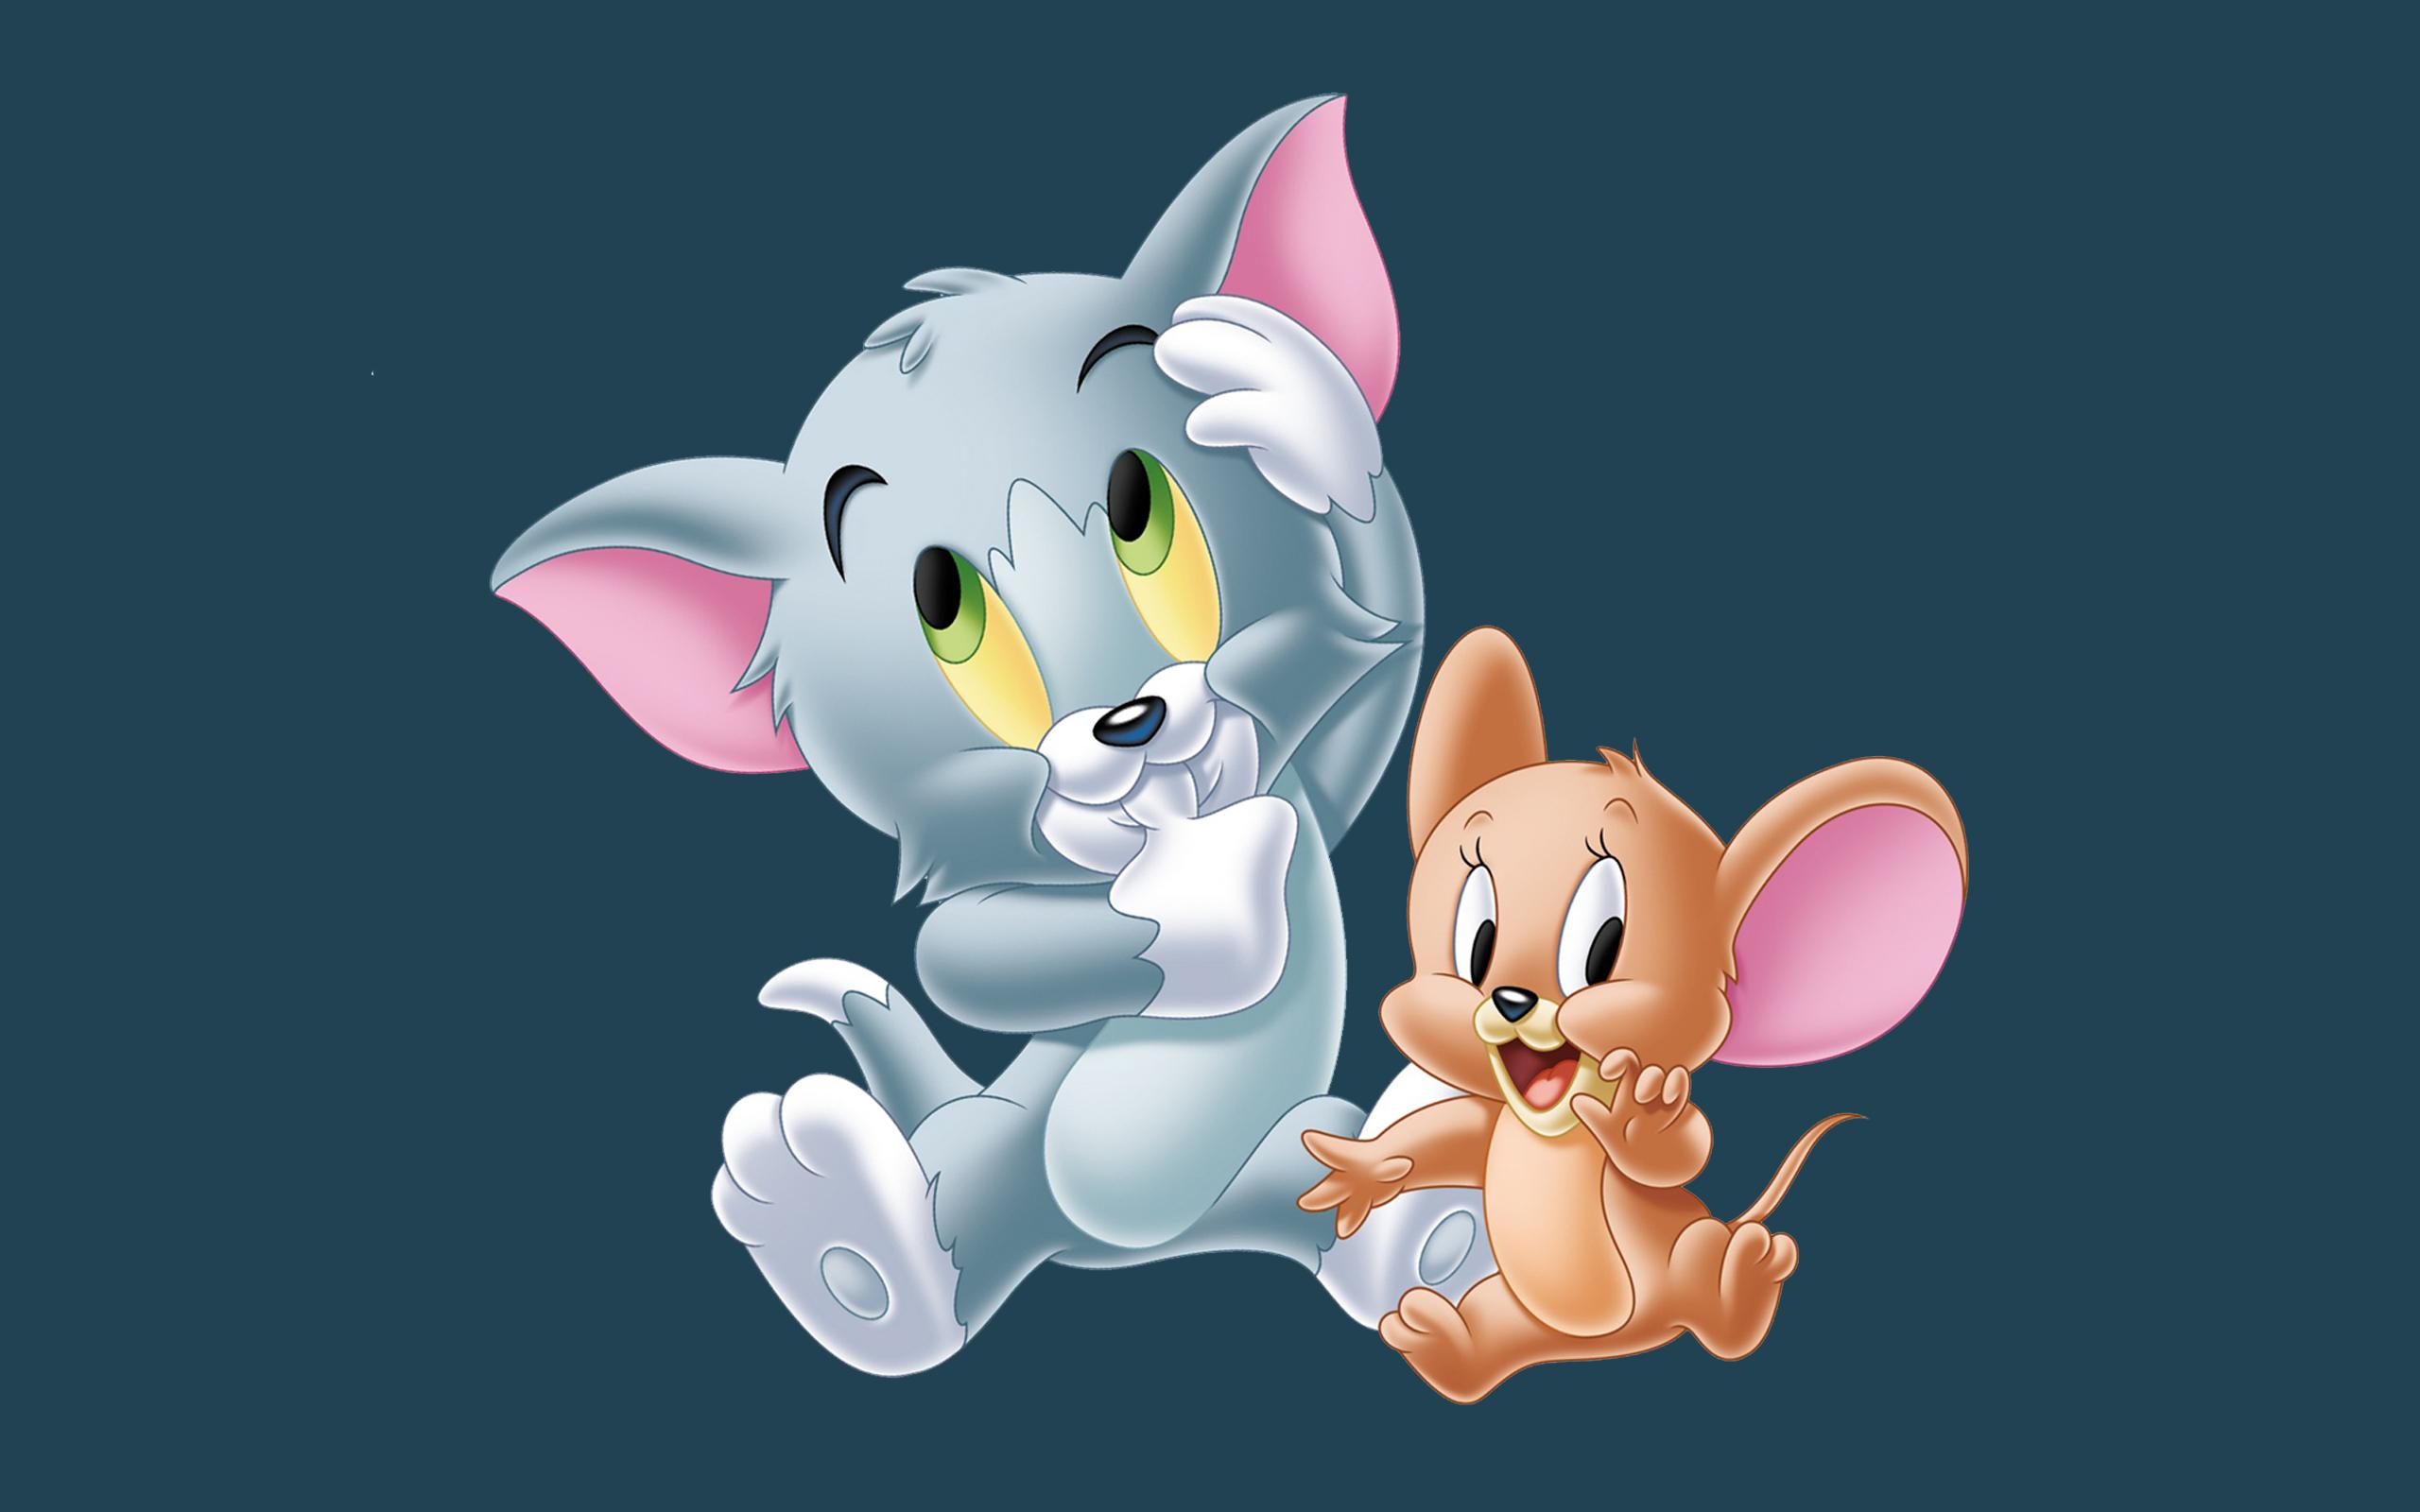 Cartoon Tom And Jerry Hd Wallpapers For Mobile